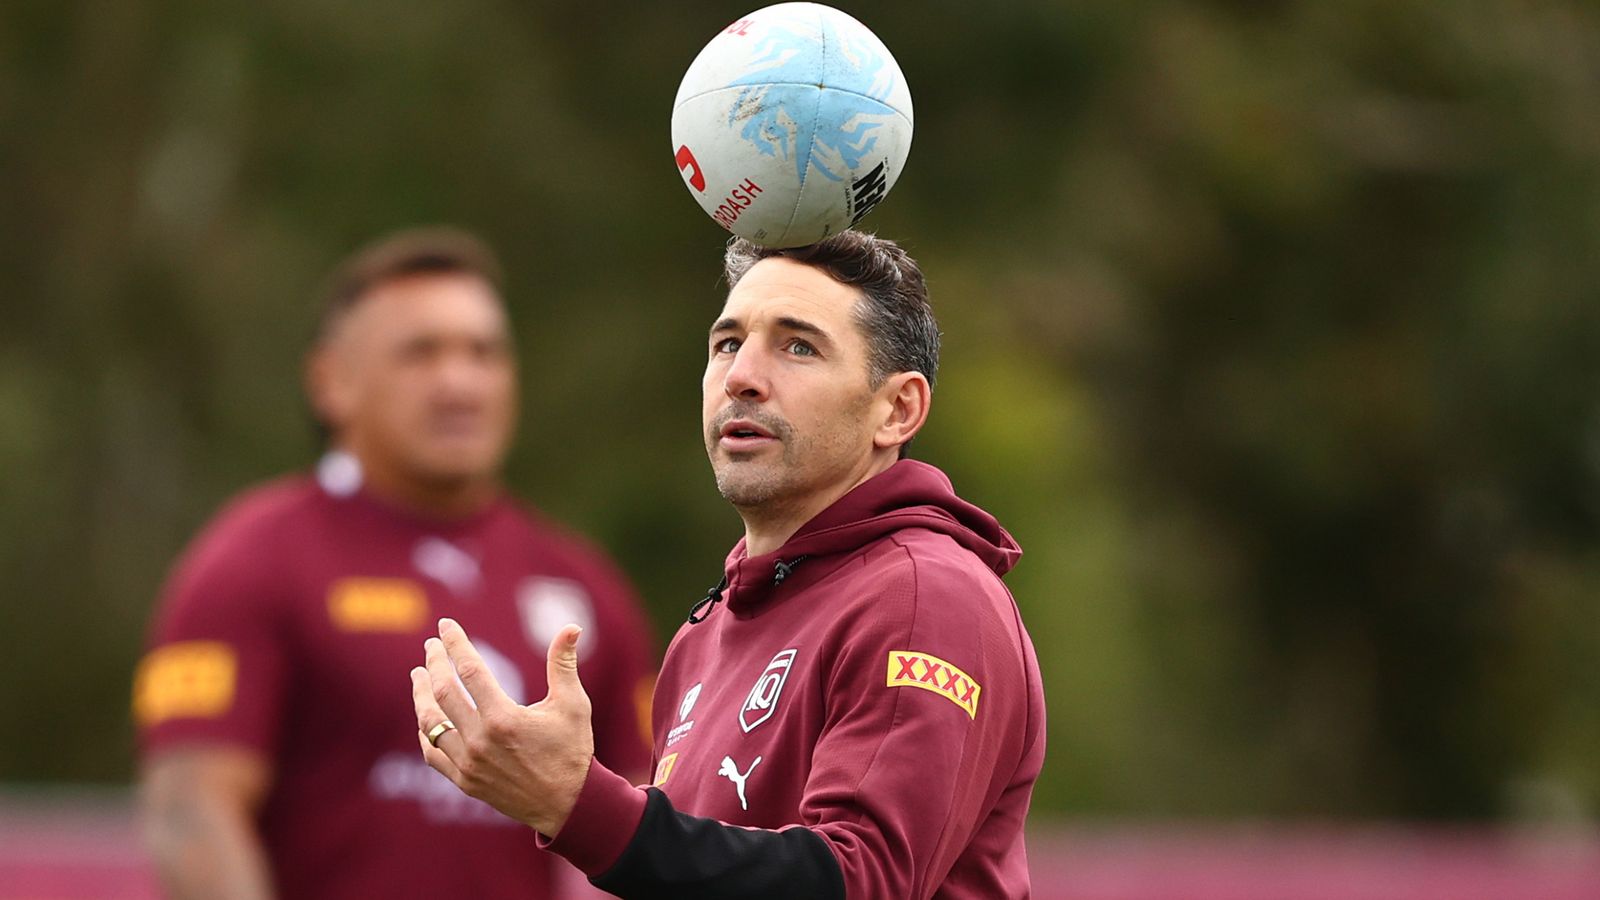 State of Origin: Billy Slater to lead Queensland against New South Wales in Sydney